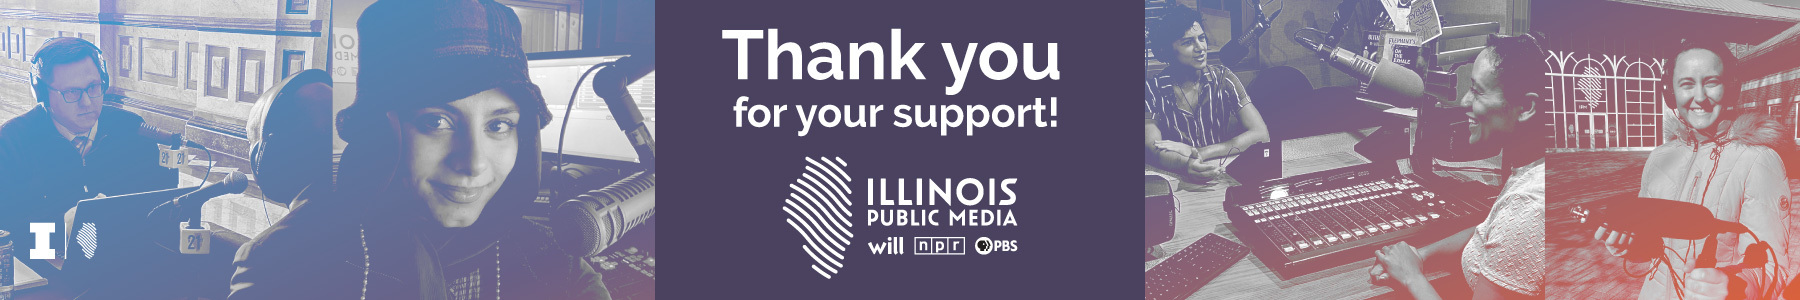 Thank you for your support! Illinois Public Media, WILL, NPR, PBS